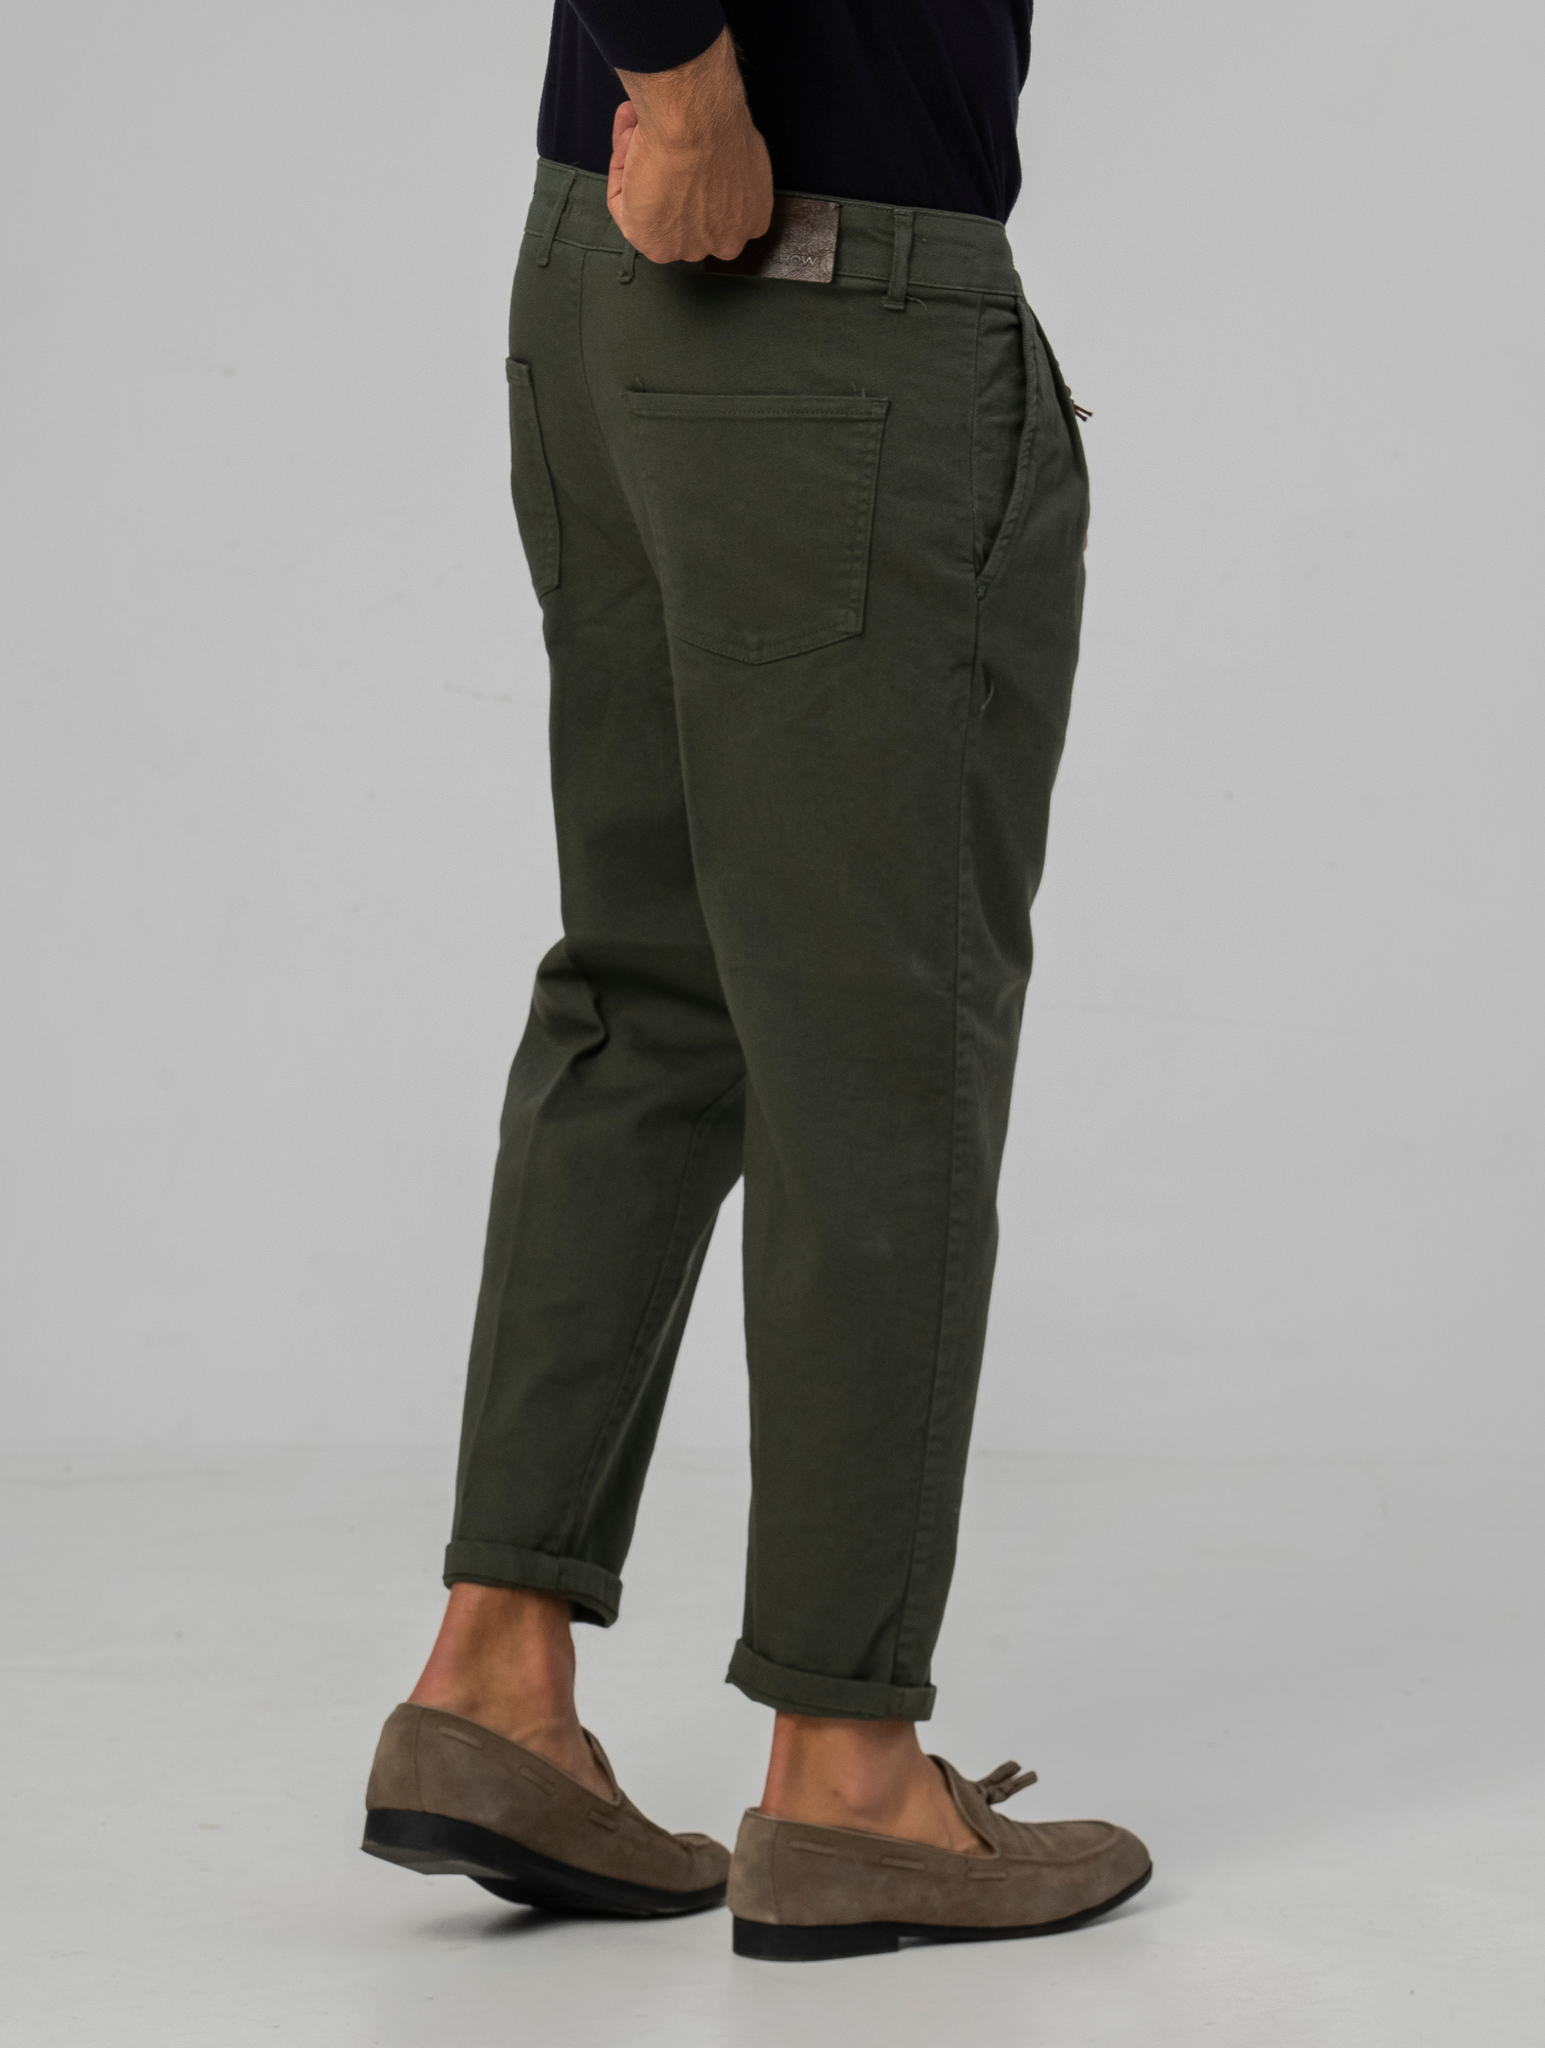 BROCK CASUAL PANTS IN ARMY GREEN